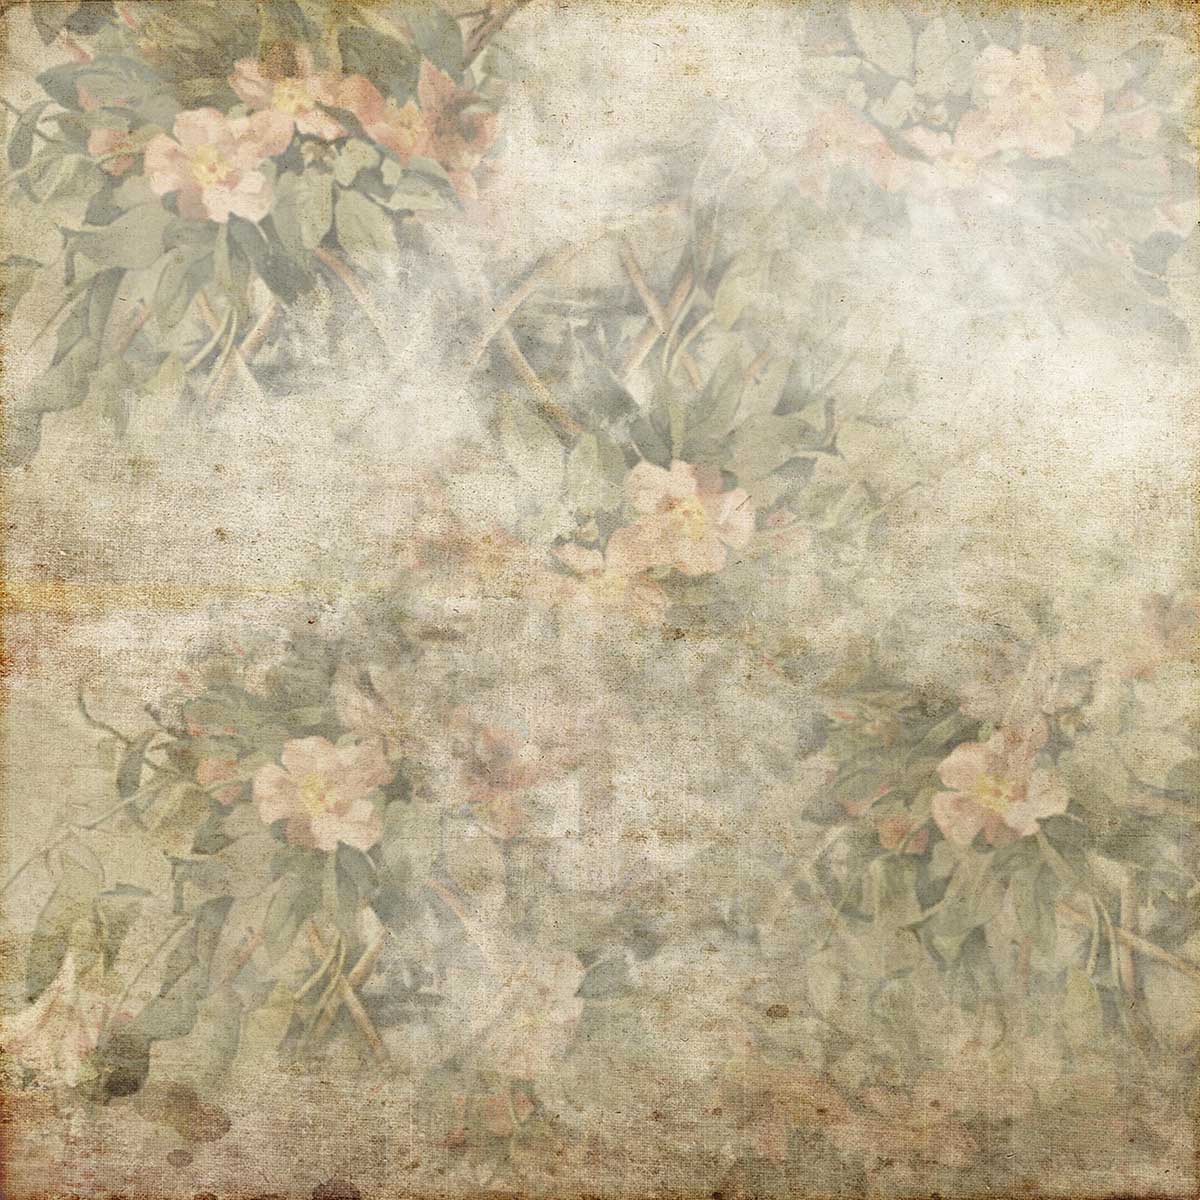 Retro Pink Floral Green Leaves Photo studio Backdrops